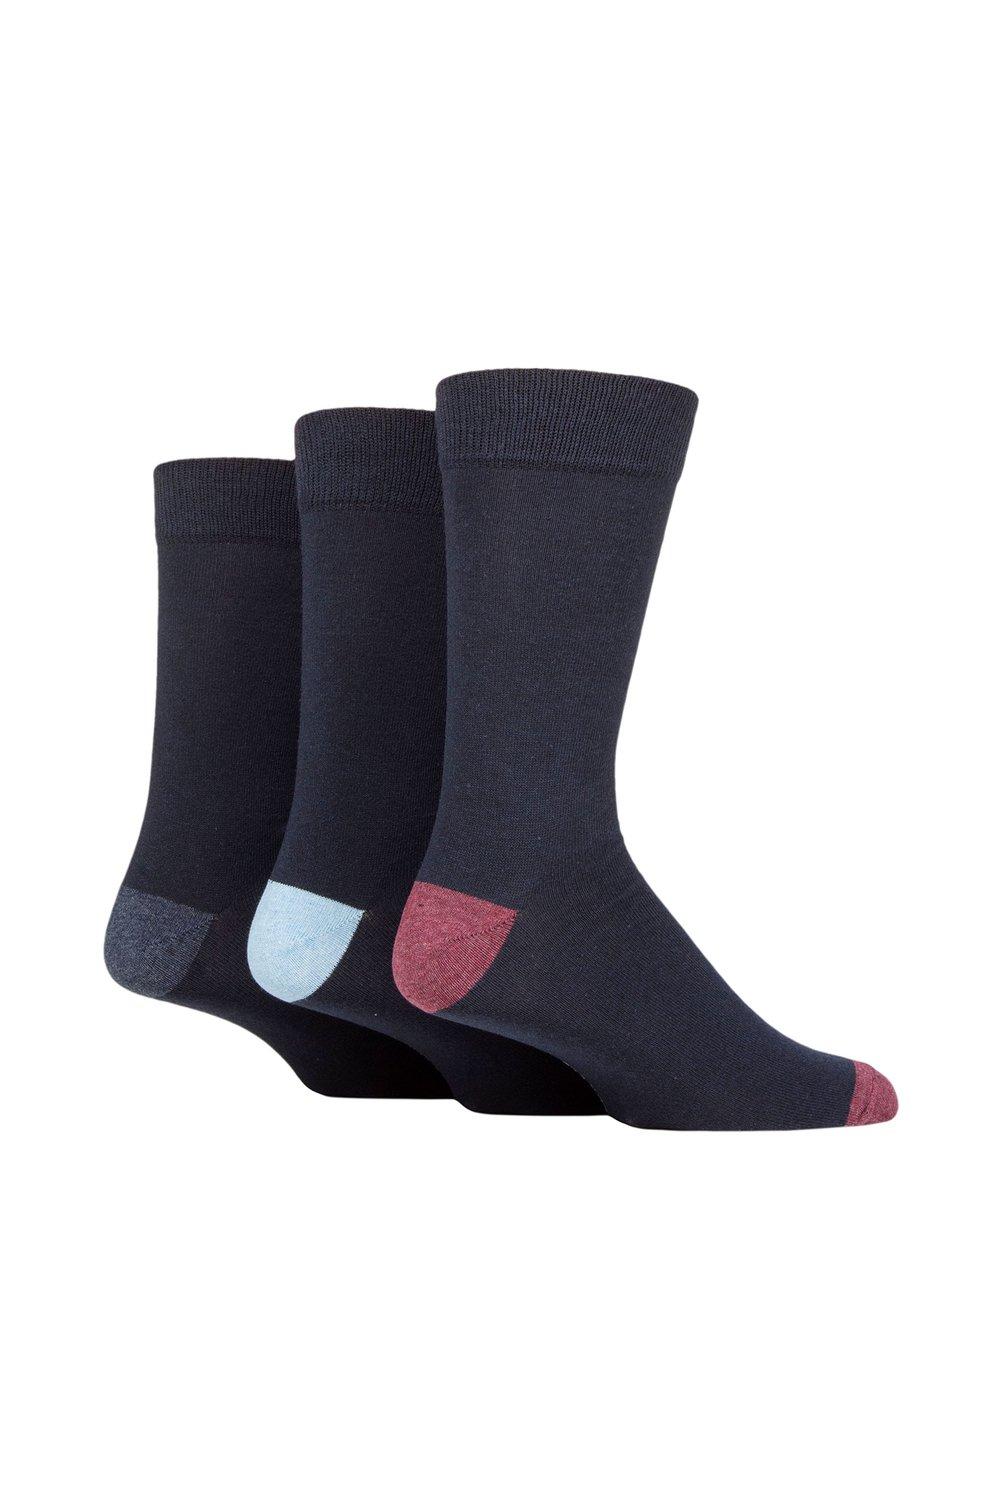 3 Pair 100% Recycled Heel and Toe Cotton Socks